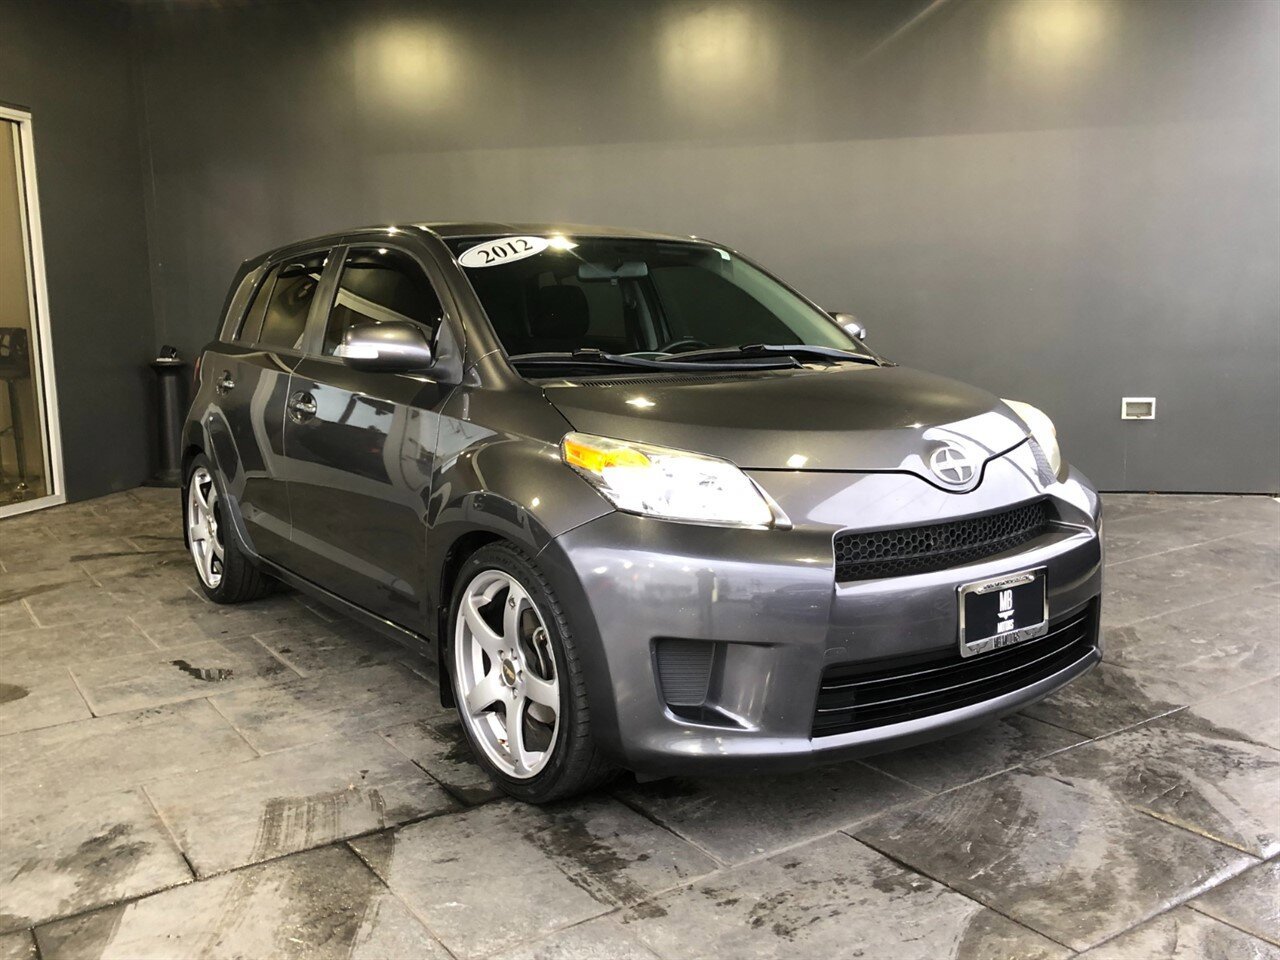 Used 2012 Scion XD's nationwide for sale - MotorCloud